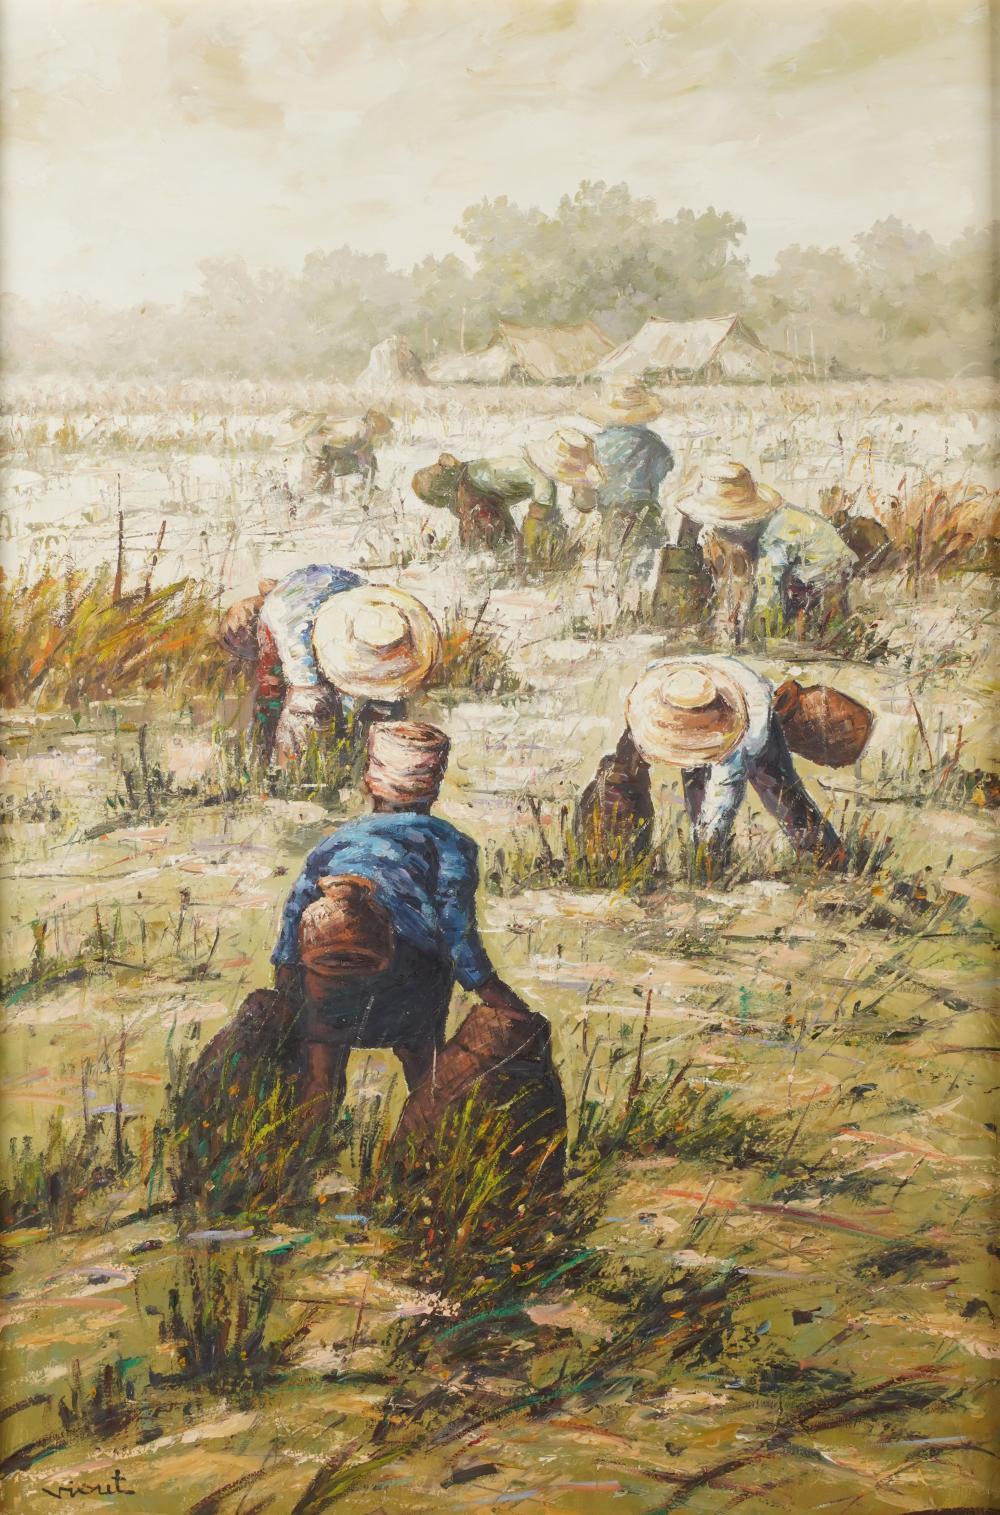 20TH CENTURY: WORKERS IN FIELD20th